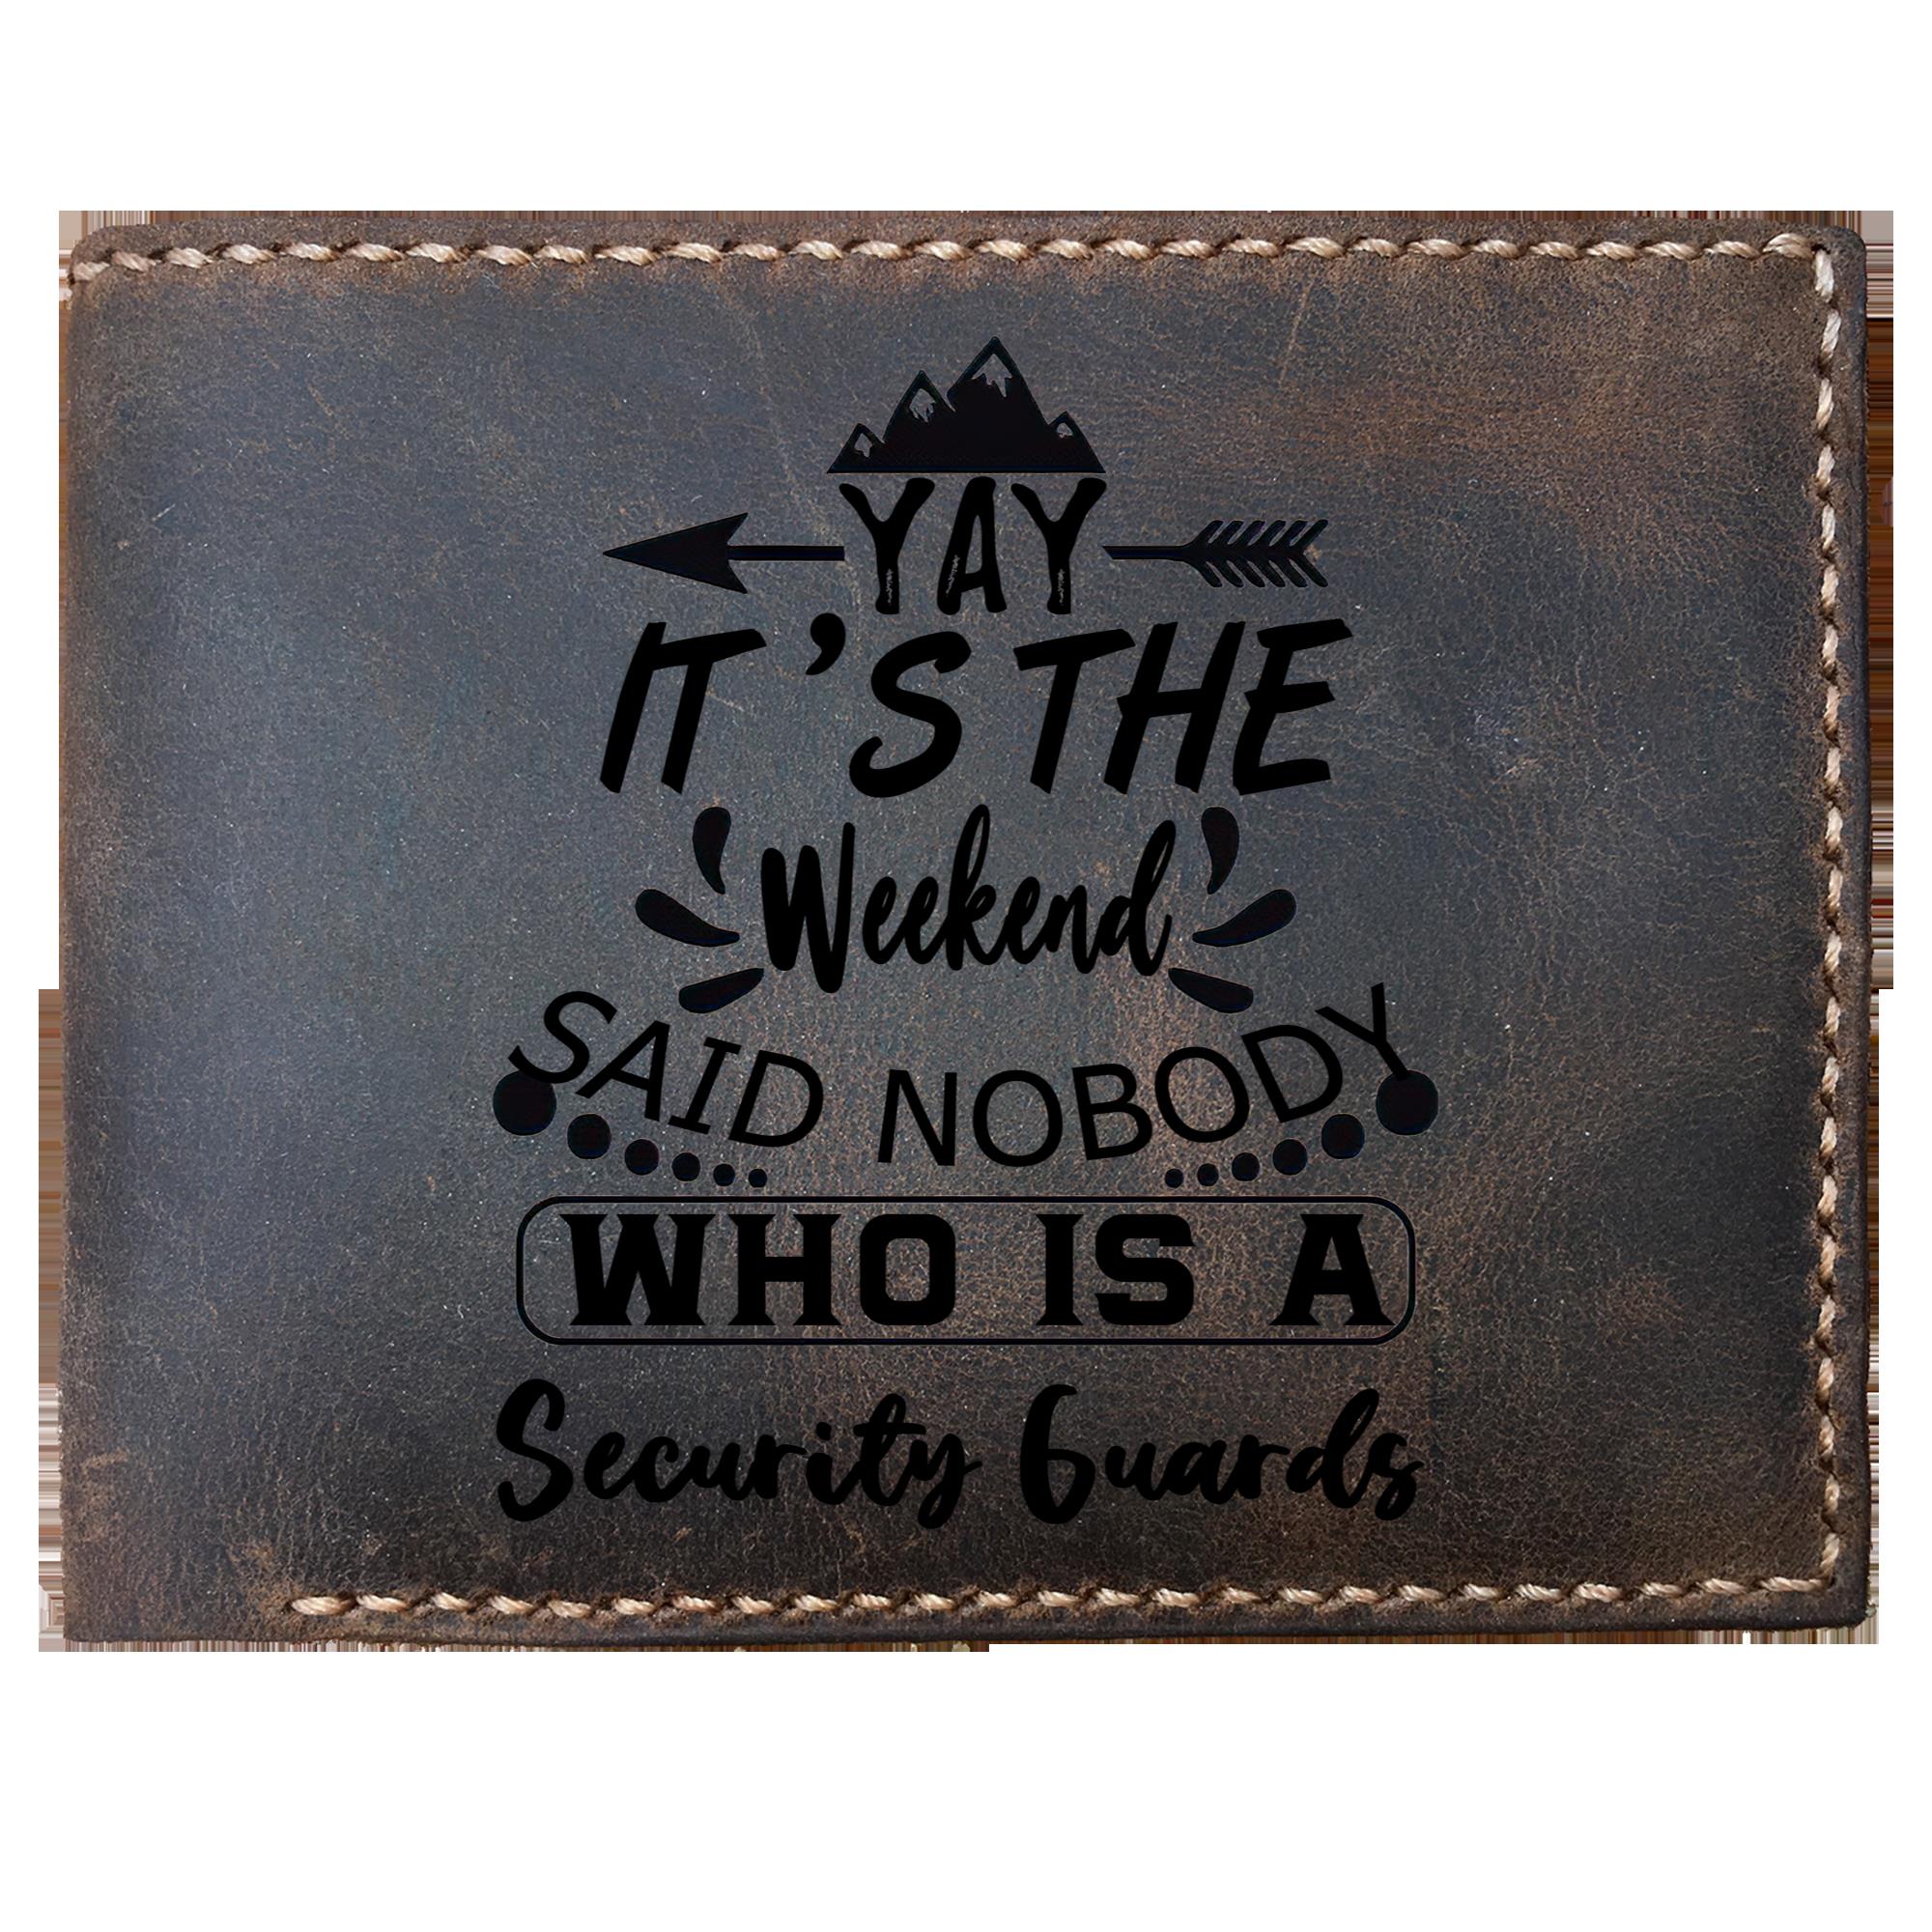 Skitongifts Funny Custom Laser Engraved Bifold Leather Wallet For Men, It's The Weekend Said Nobody Who Is A Security Guards, Father's Day Gifts